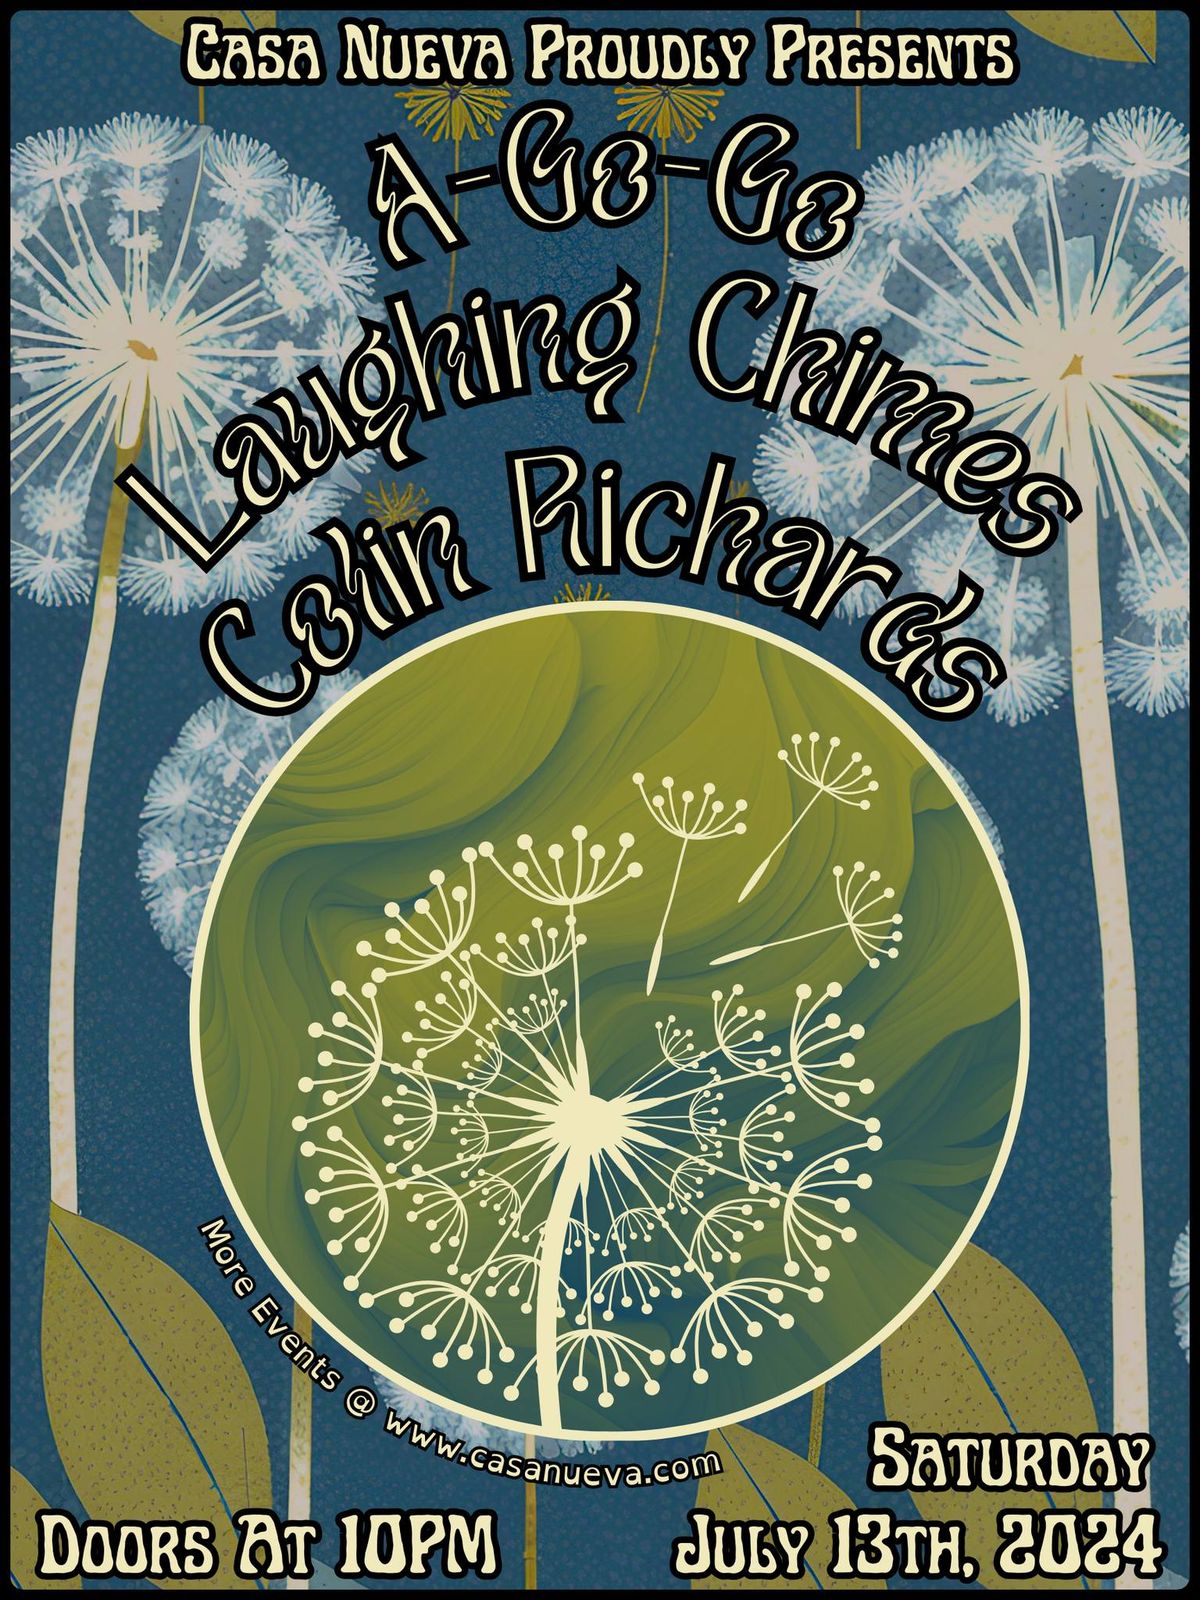 A-Go-Go  with Laughing Chimes, Colin Richards